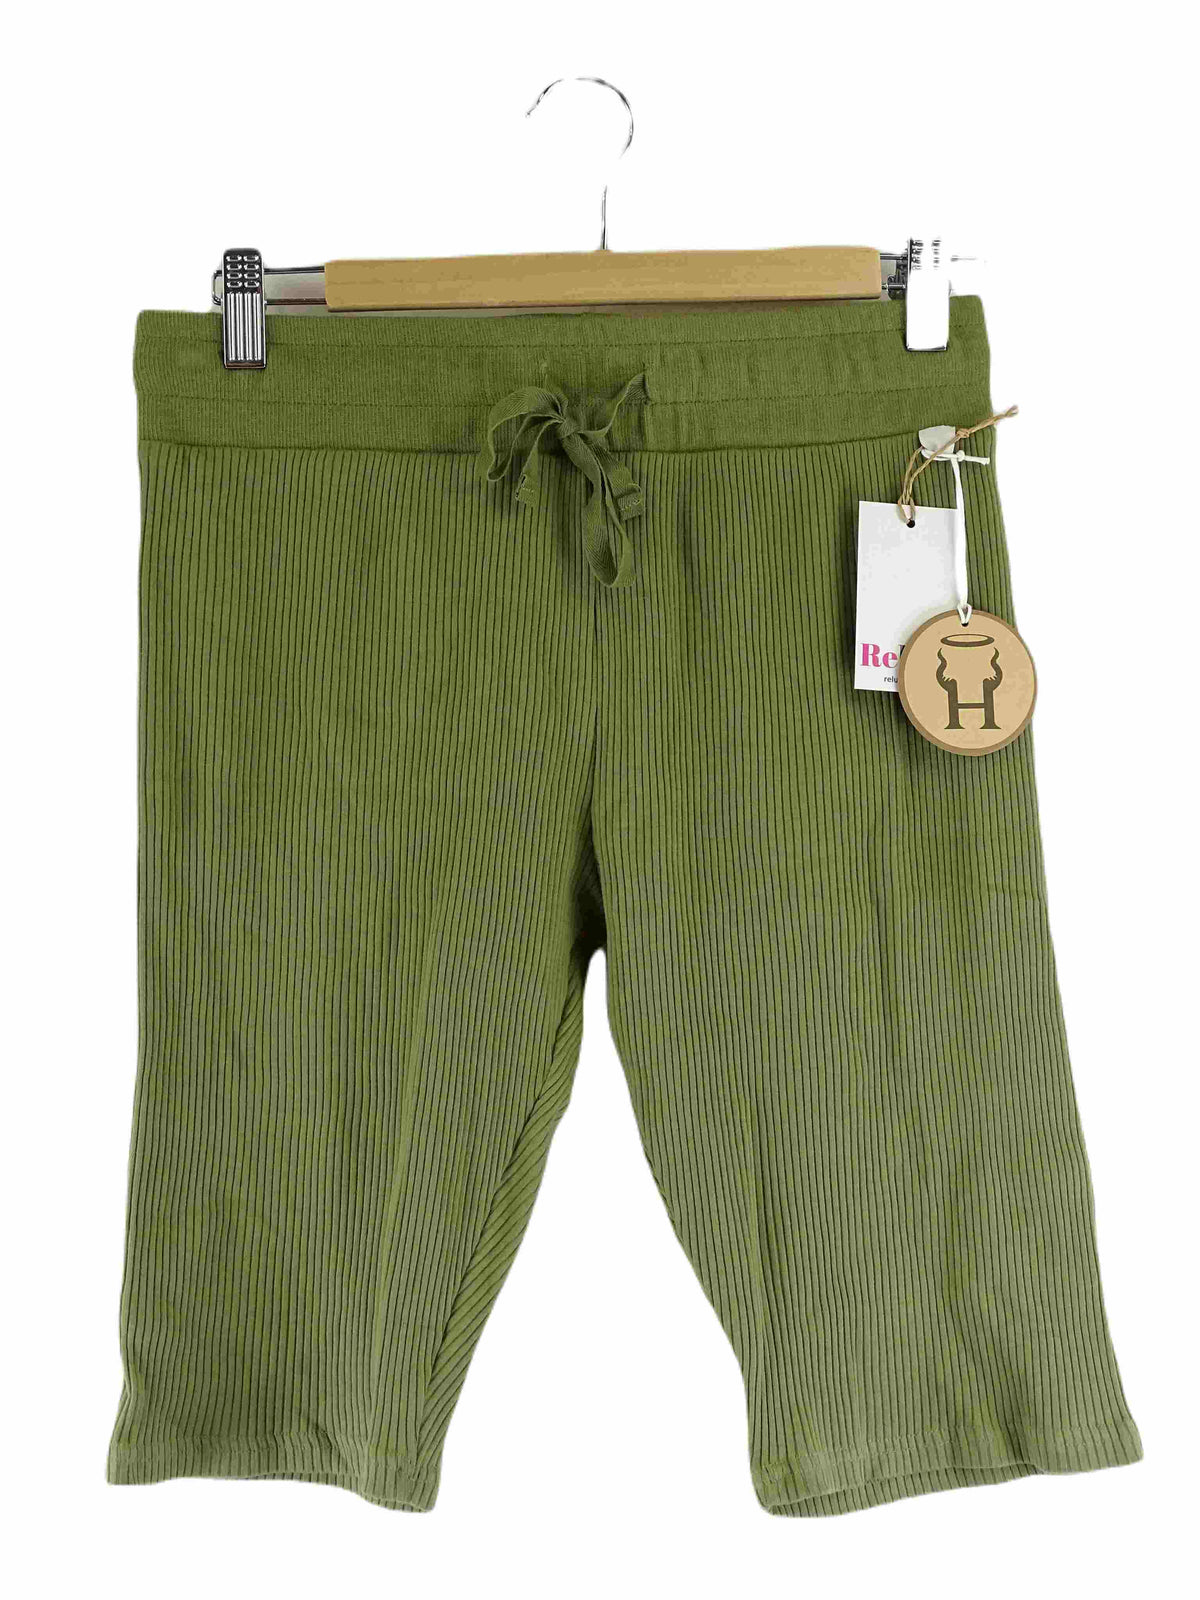 Halo and Horns Green Shorts M